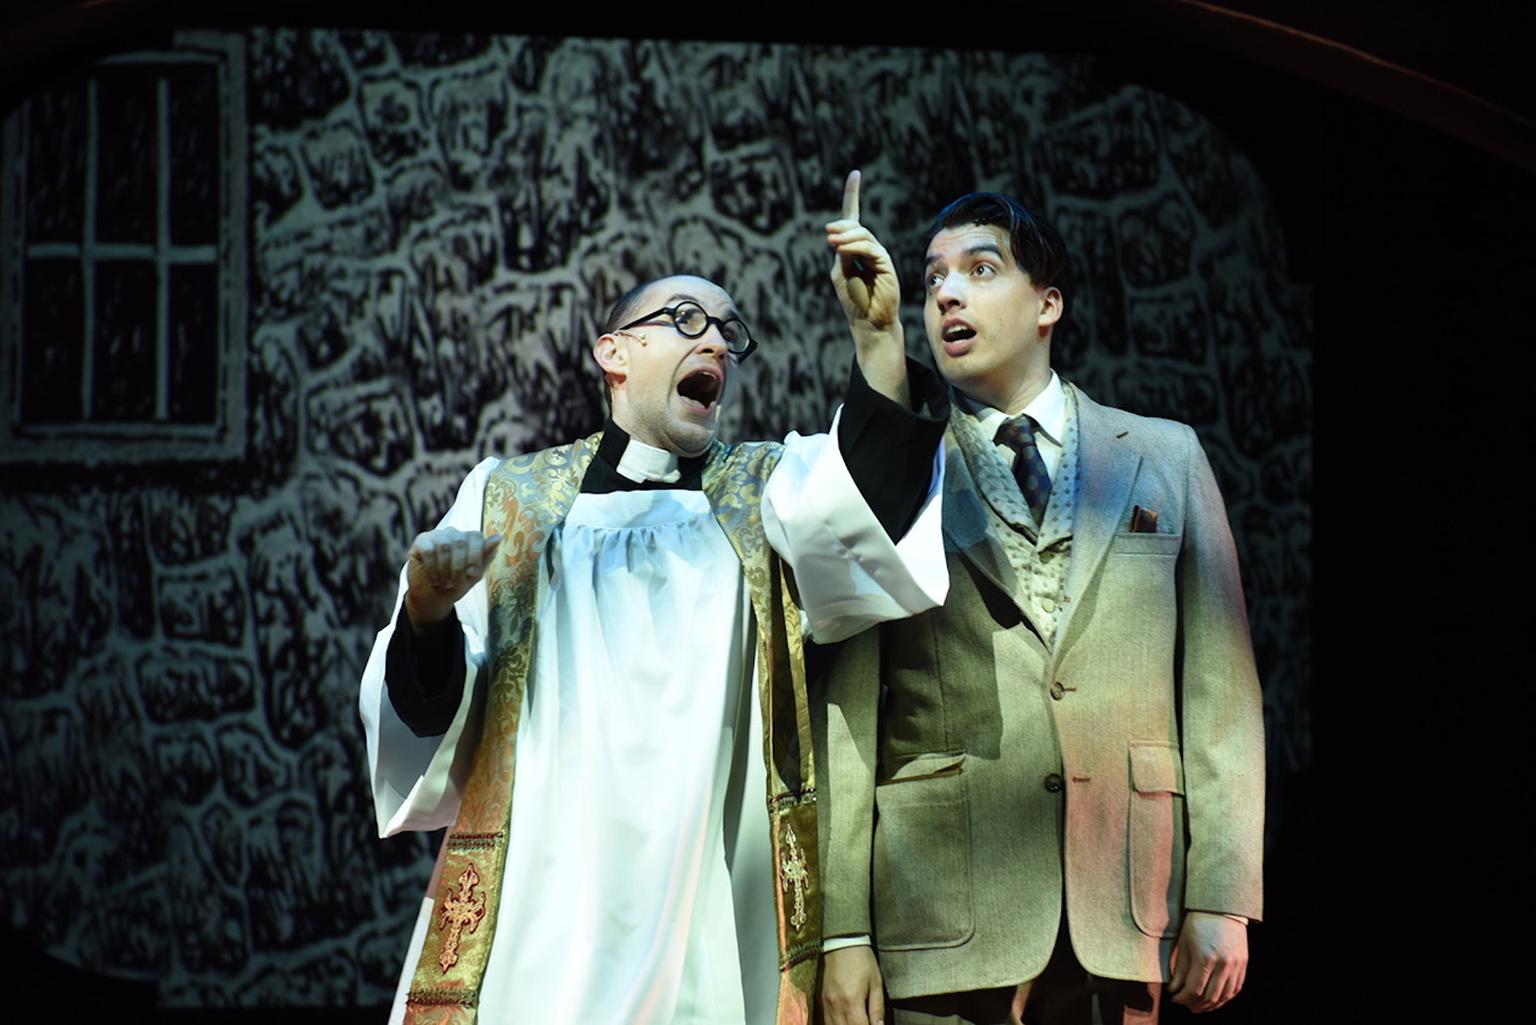 Matt Crowle and Andrés Enriquez in “A Gentleman’s Guide to Love & Murder.” (Photo by Michael Courier)